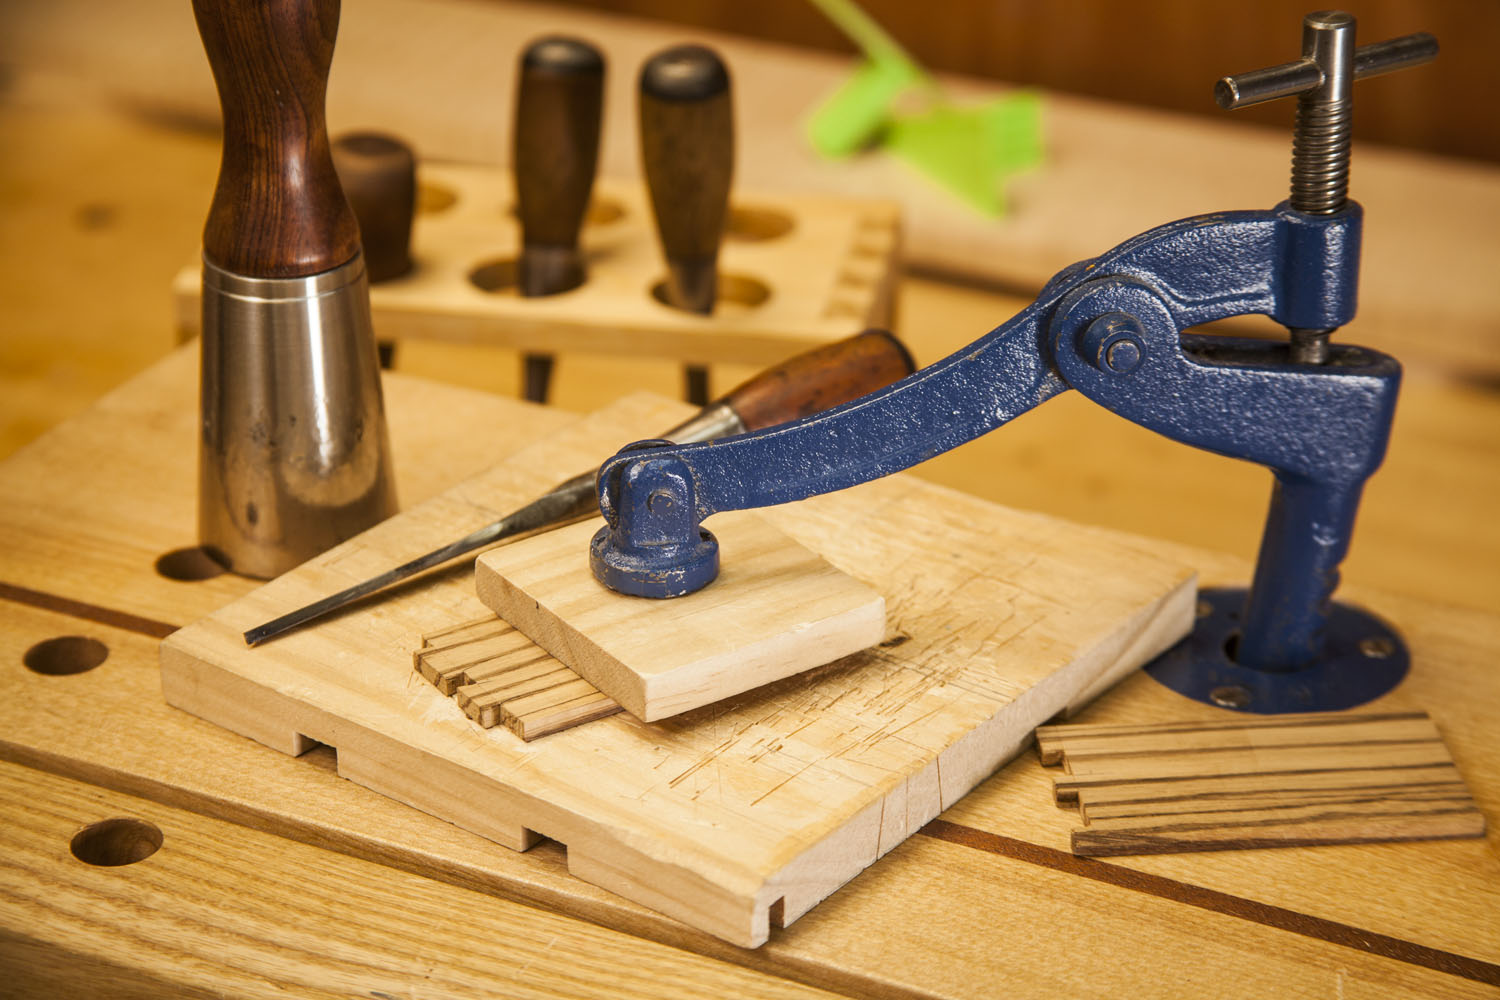 Moxon vise optimized for dovetails in small parts